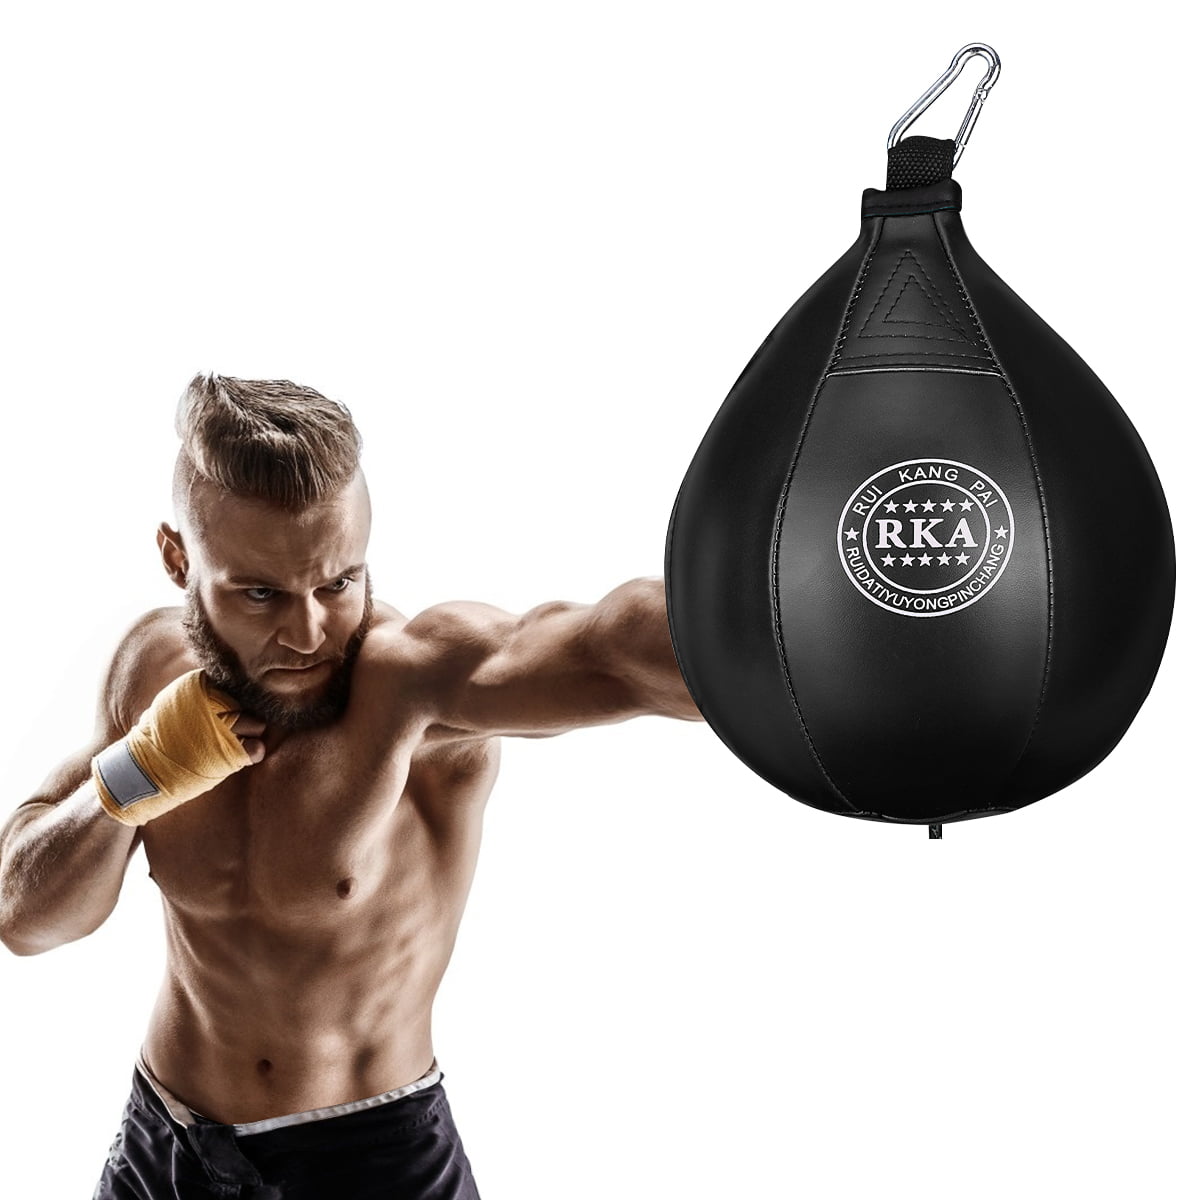 BOXING SPEEDBALL Pear/Round Dodge Double End Punch Bag Mma Training Speed Ball 